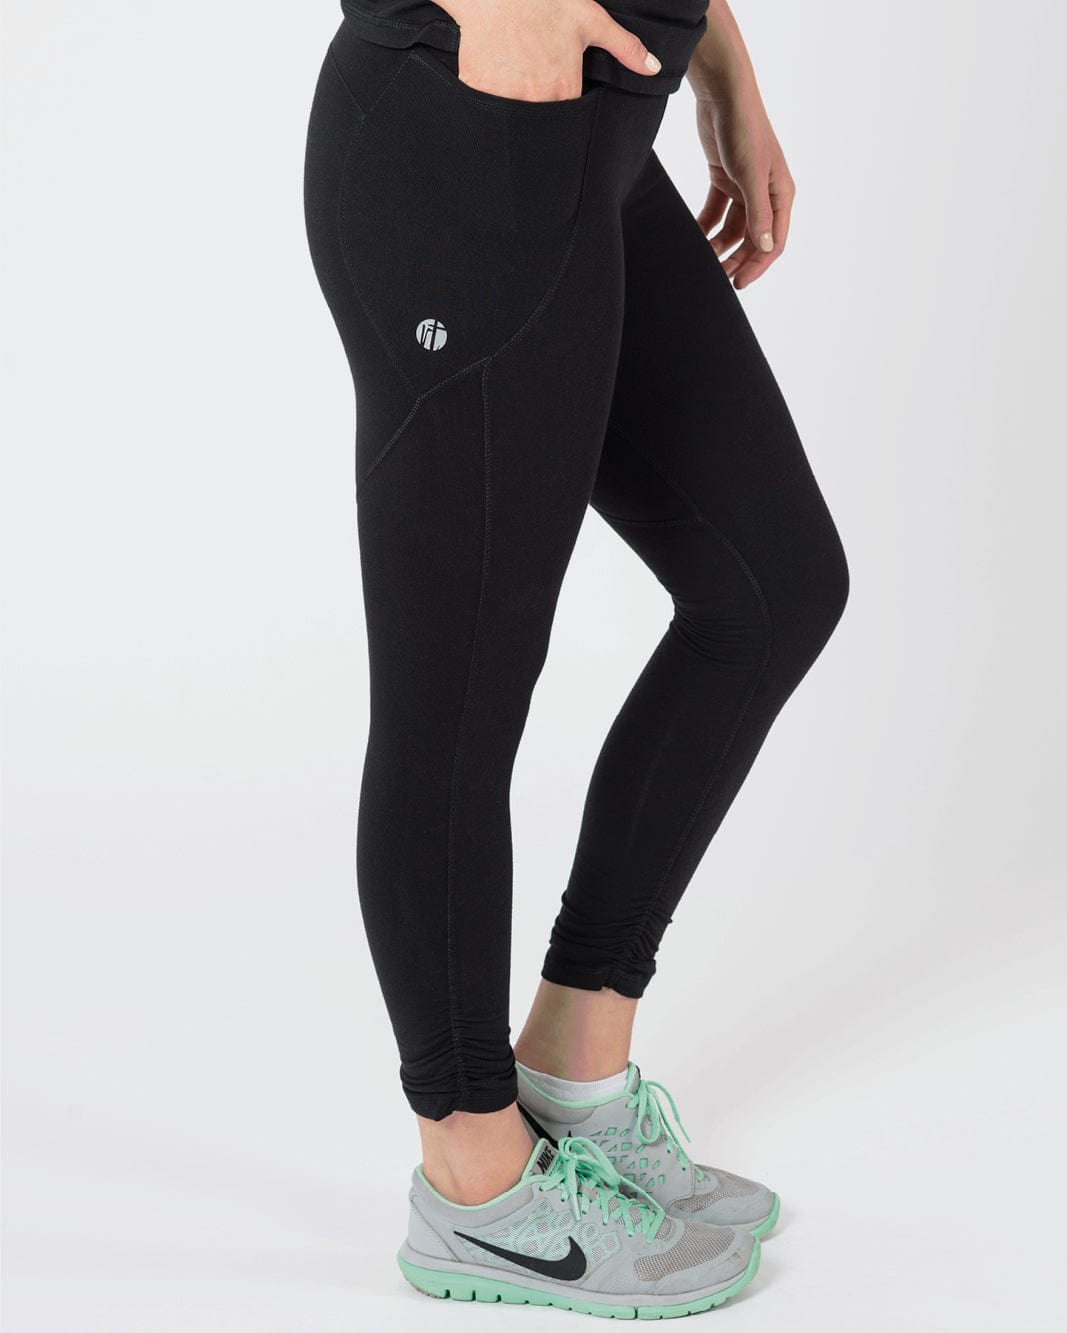 Yoga Shorts for Women with Inner/Out Pockets - WF Shopping